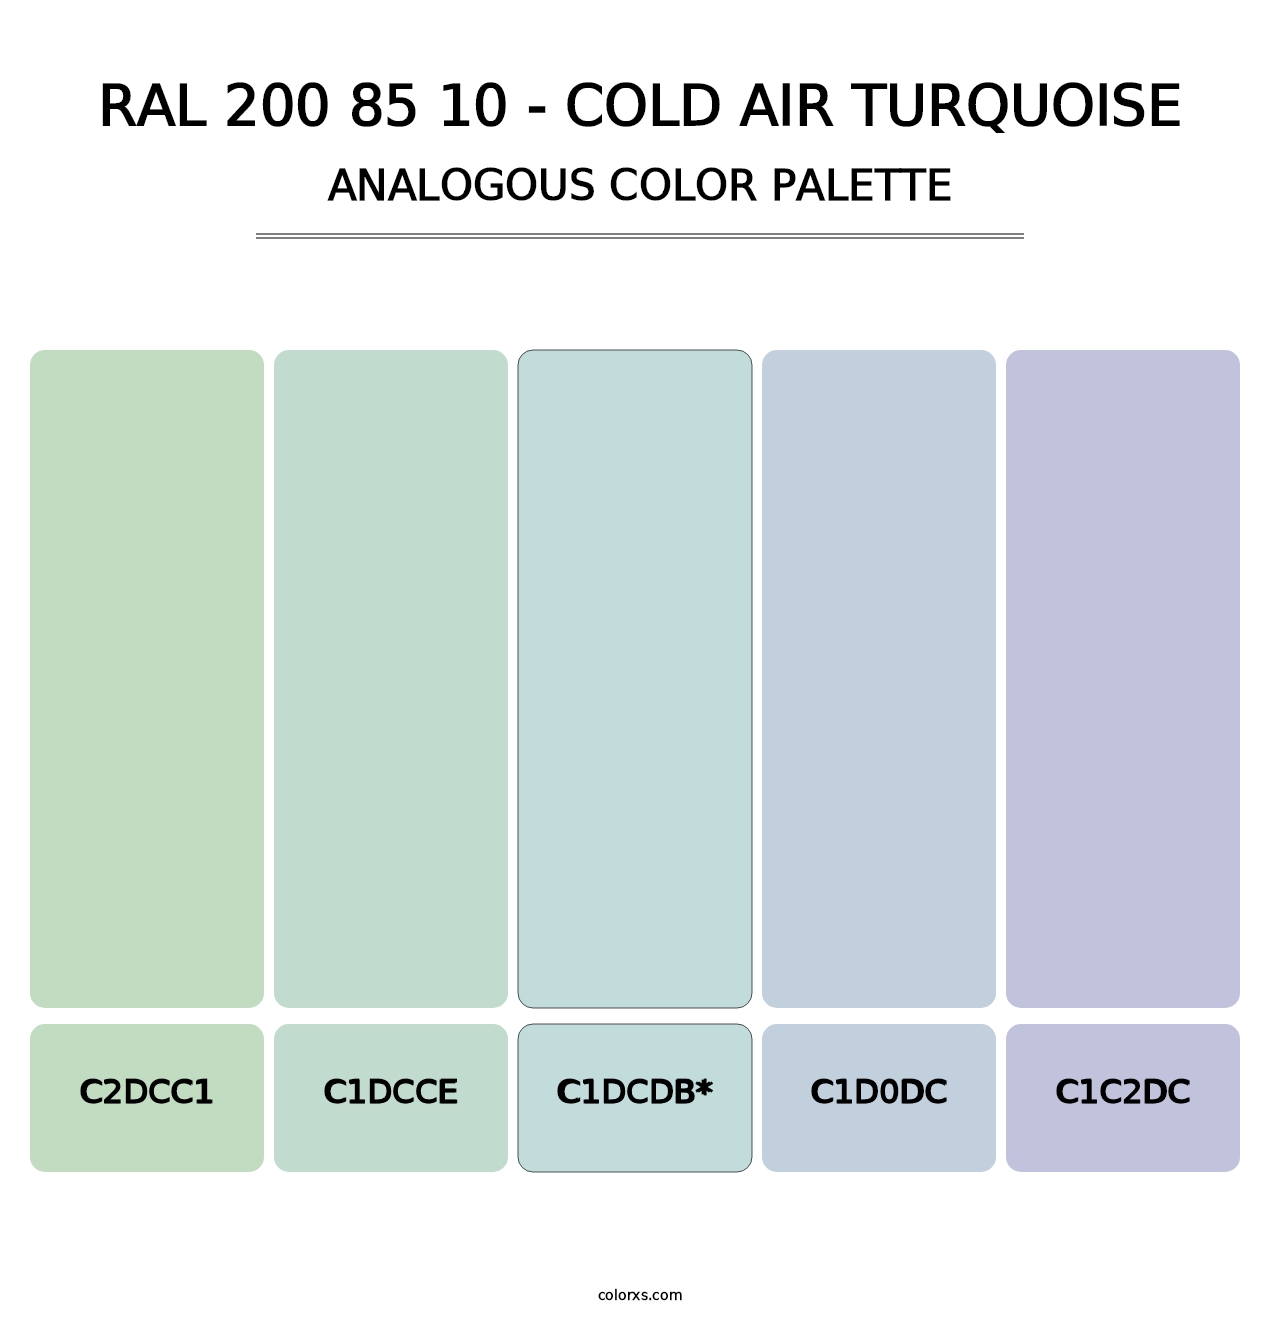 RAL 200 85 10 - Cold Air Turquoise - Analogous Color Palette